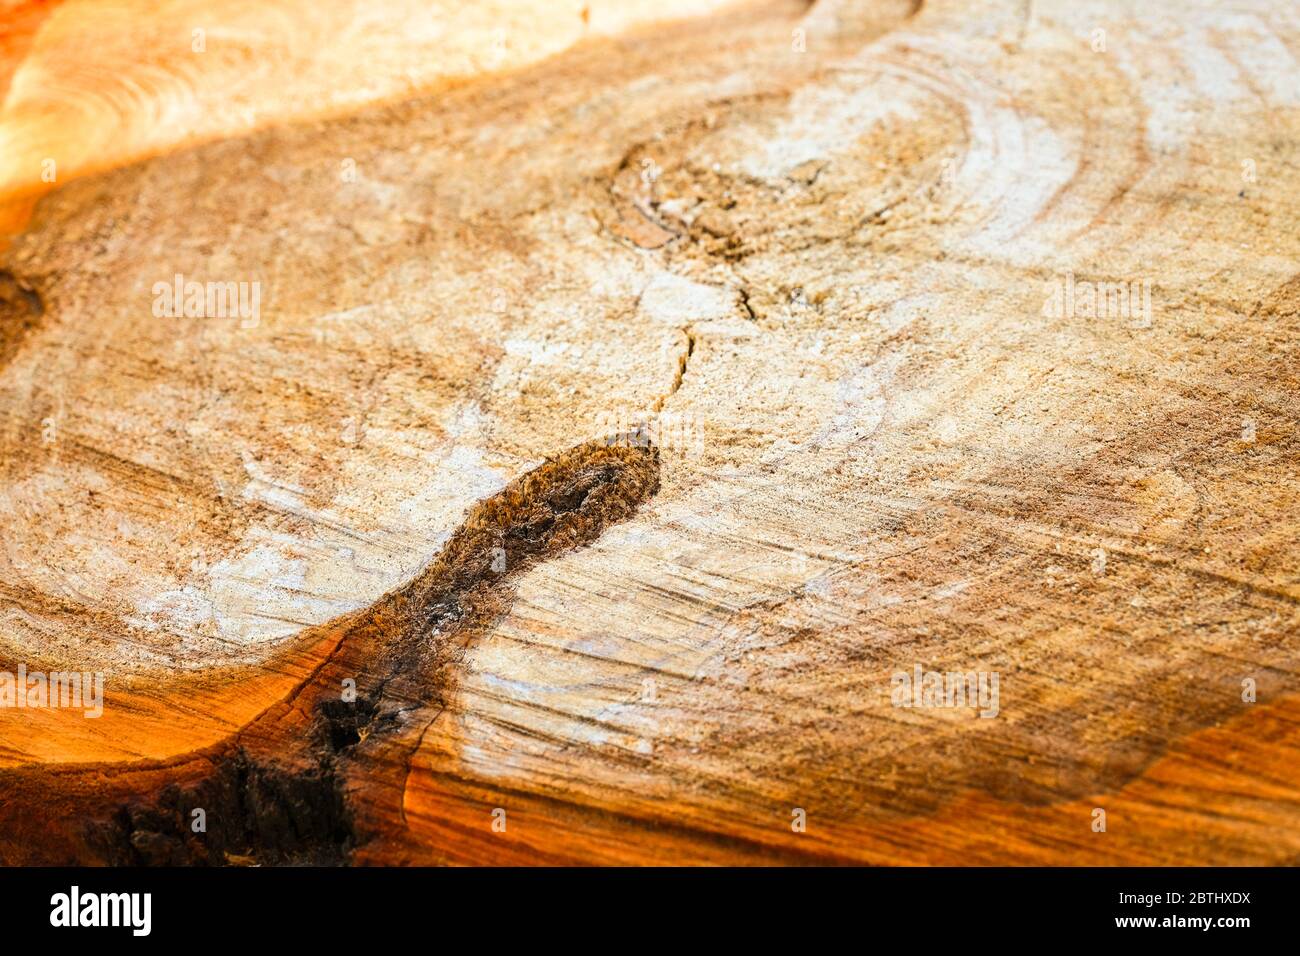 Natural wood texture of cut tree trunk. Close-up wooden cut structure. Willow tree. Sale. Selective focus Stock Photo